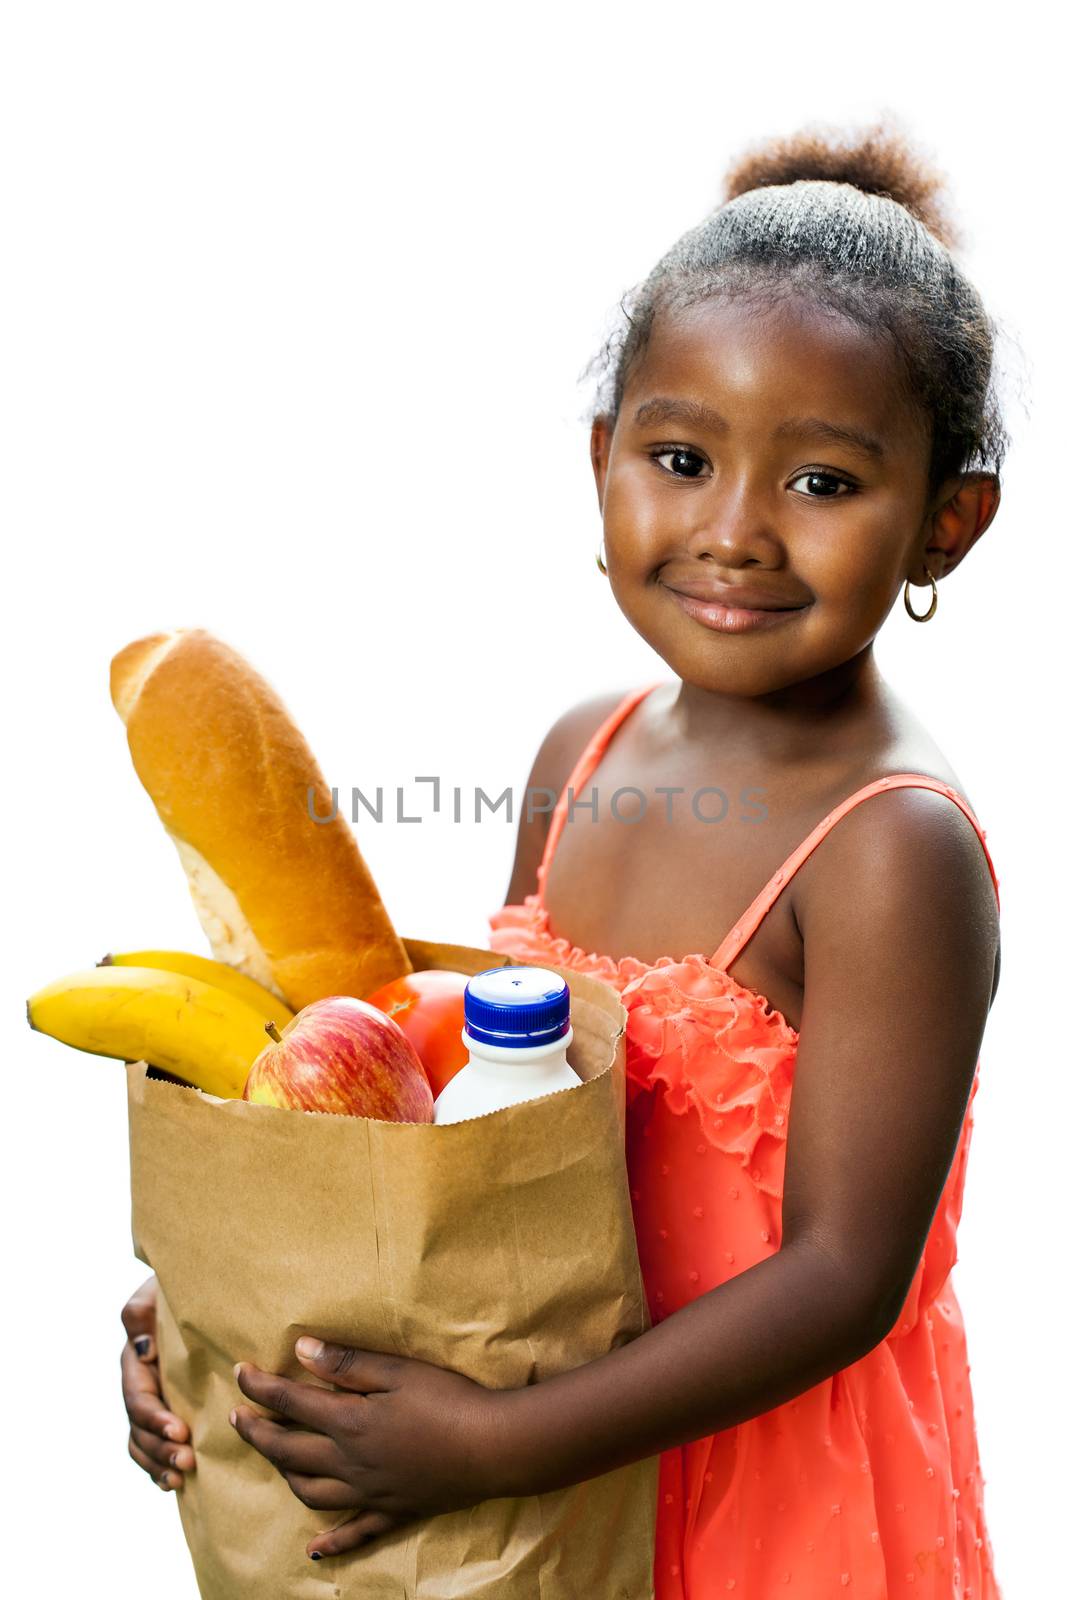 Close up portrait of cute African girl in red dress holding essential groceries in brown bag.Isolated on white background.